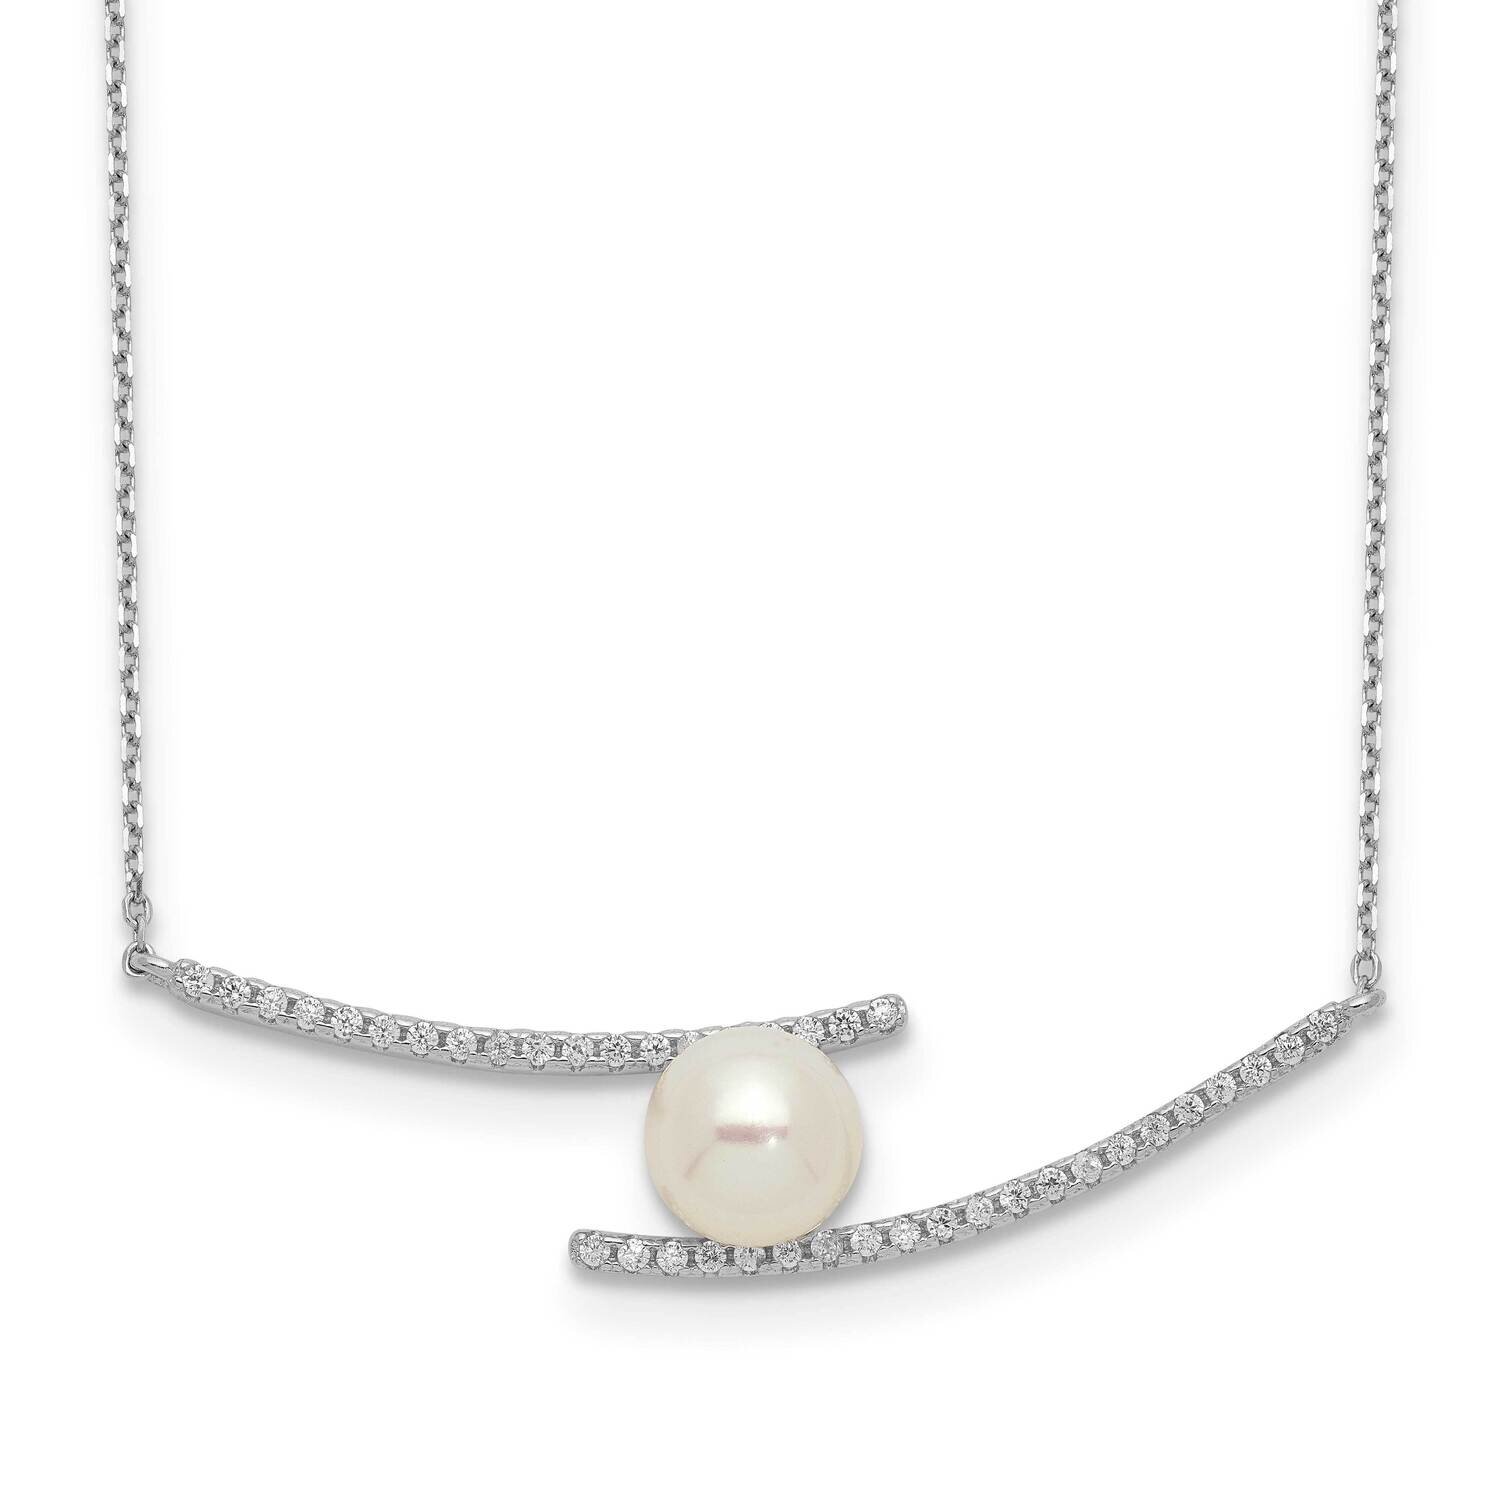 7-8mm White Button Fwc Pearl Cz Necklace Sterling Silver Rhodium-plated QH5506-17